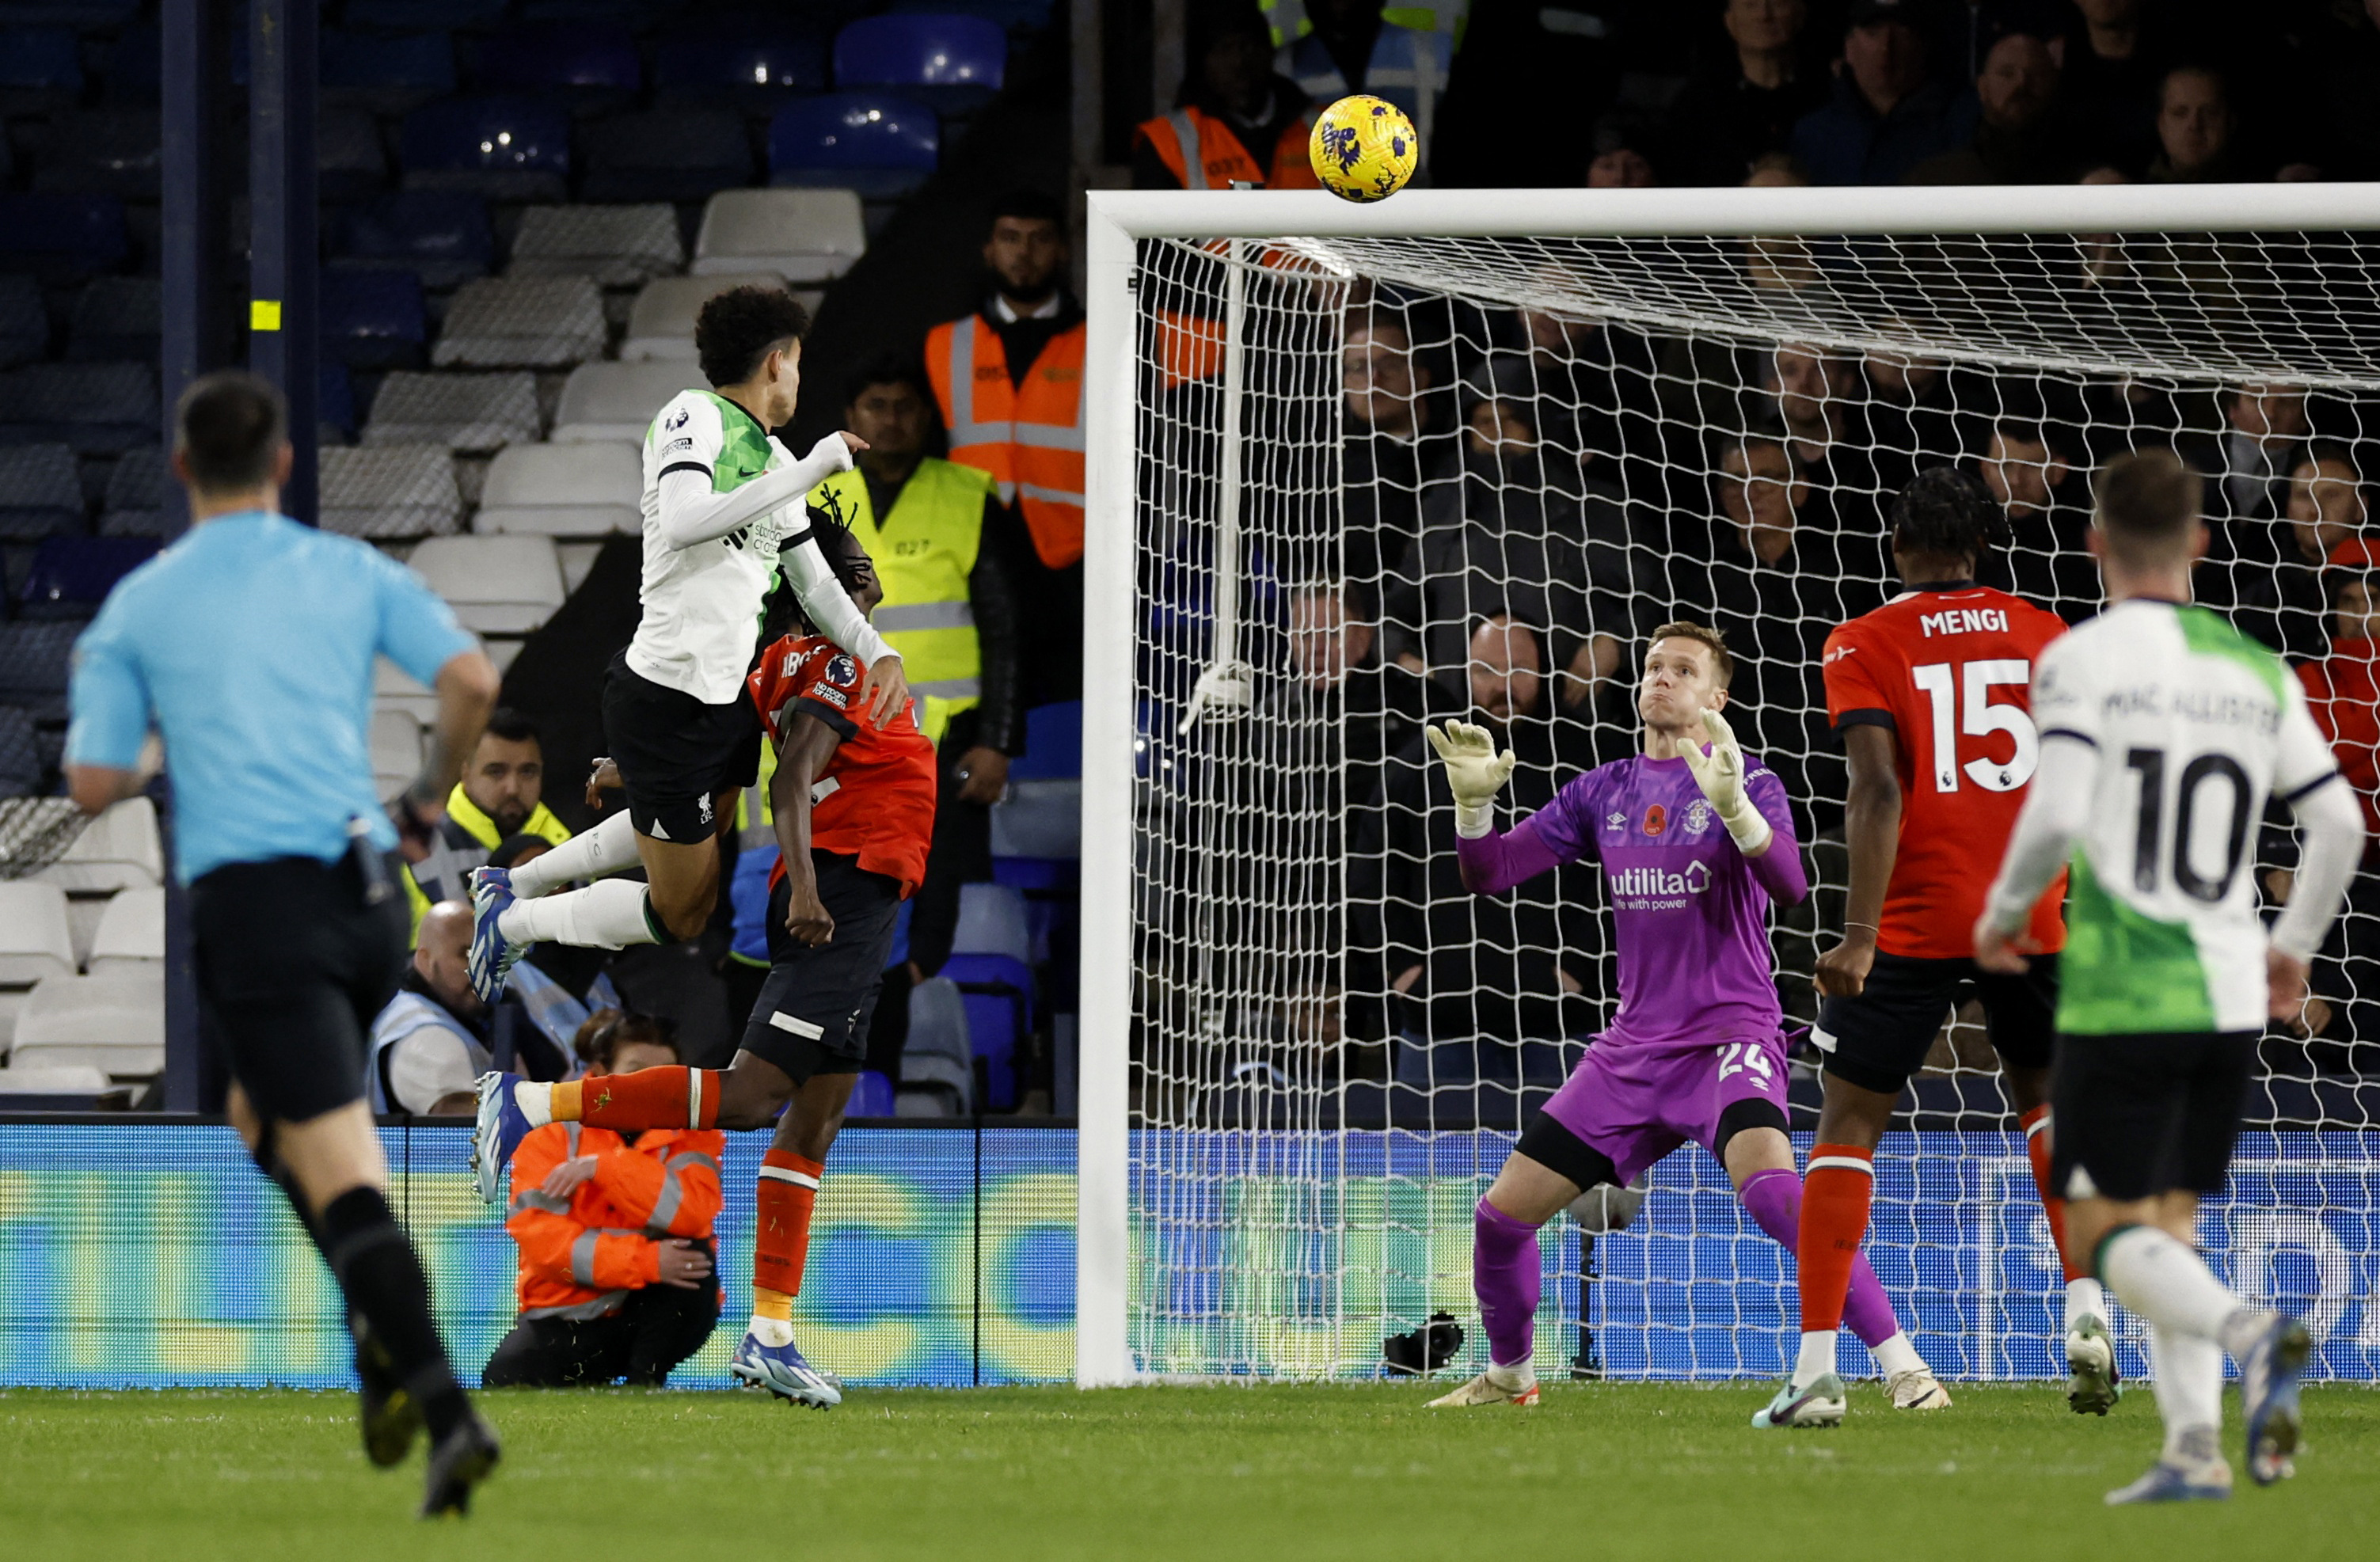 Emotional Diaz goal rescues draw for Liverpool against lowly Luton | Reuters